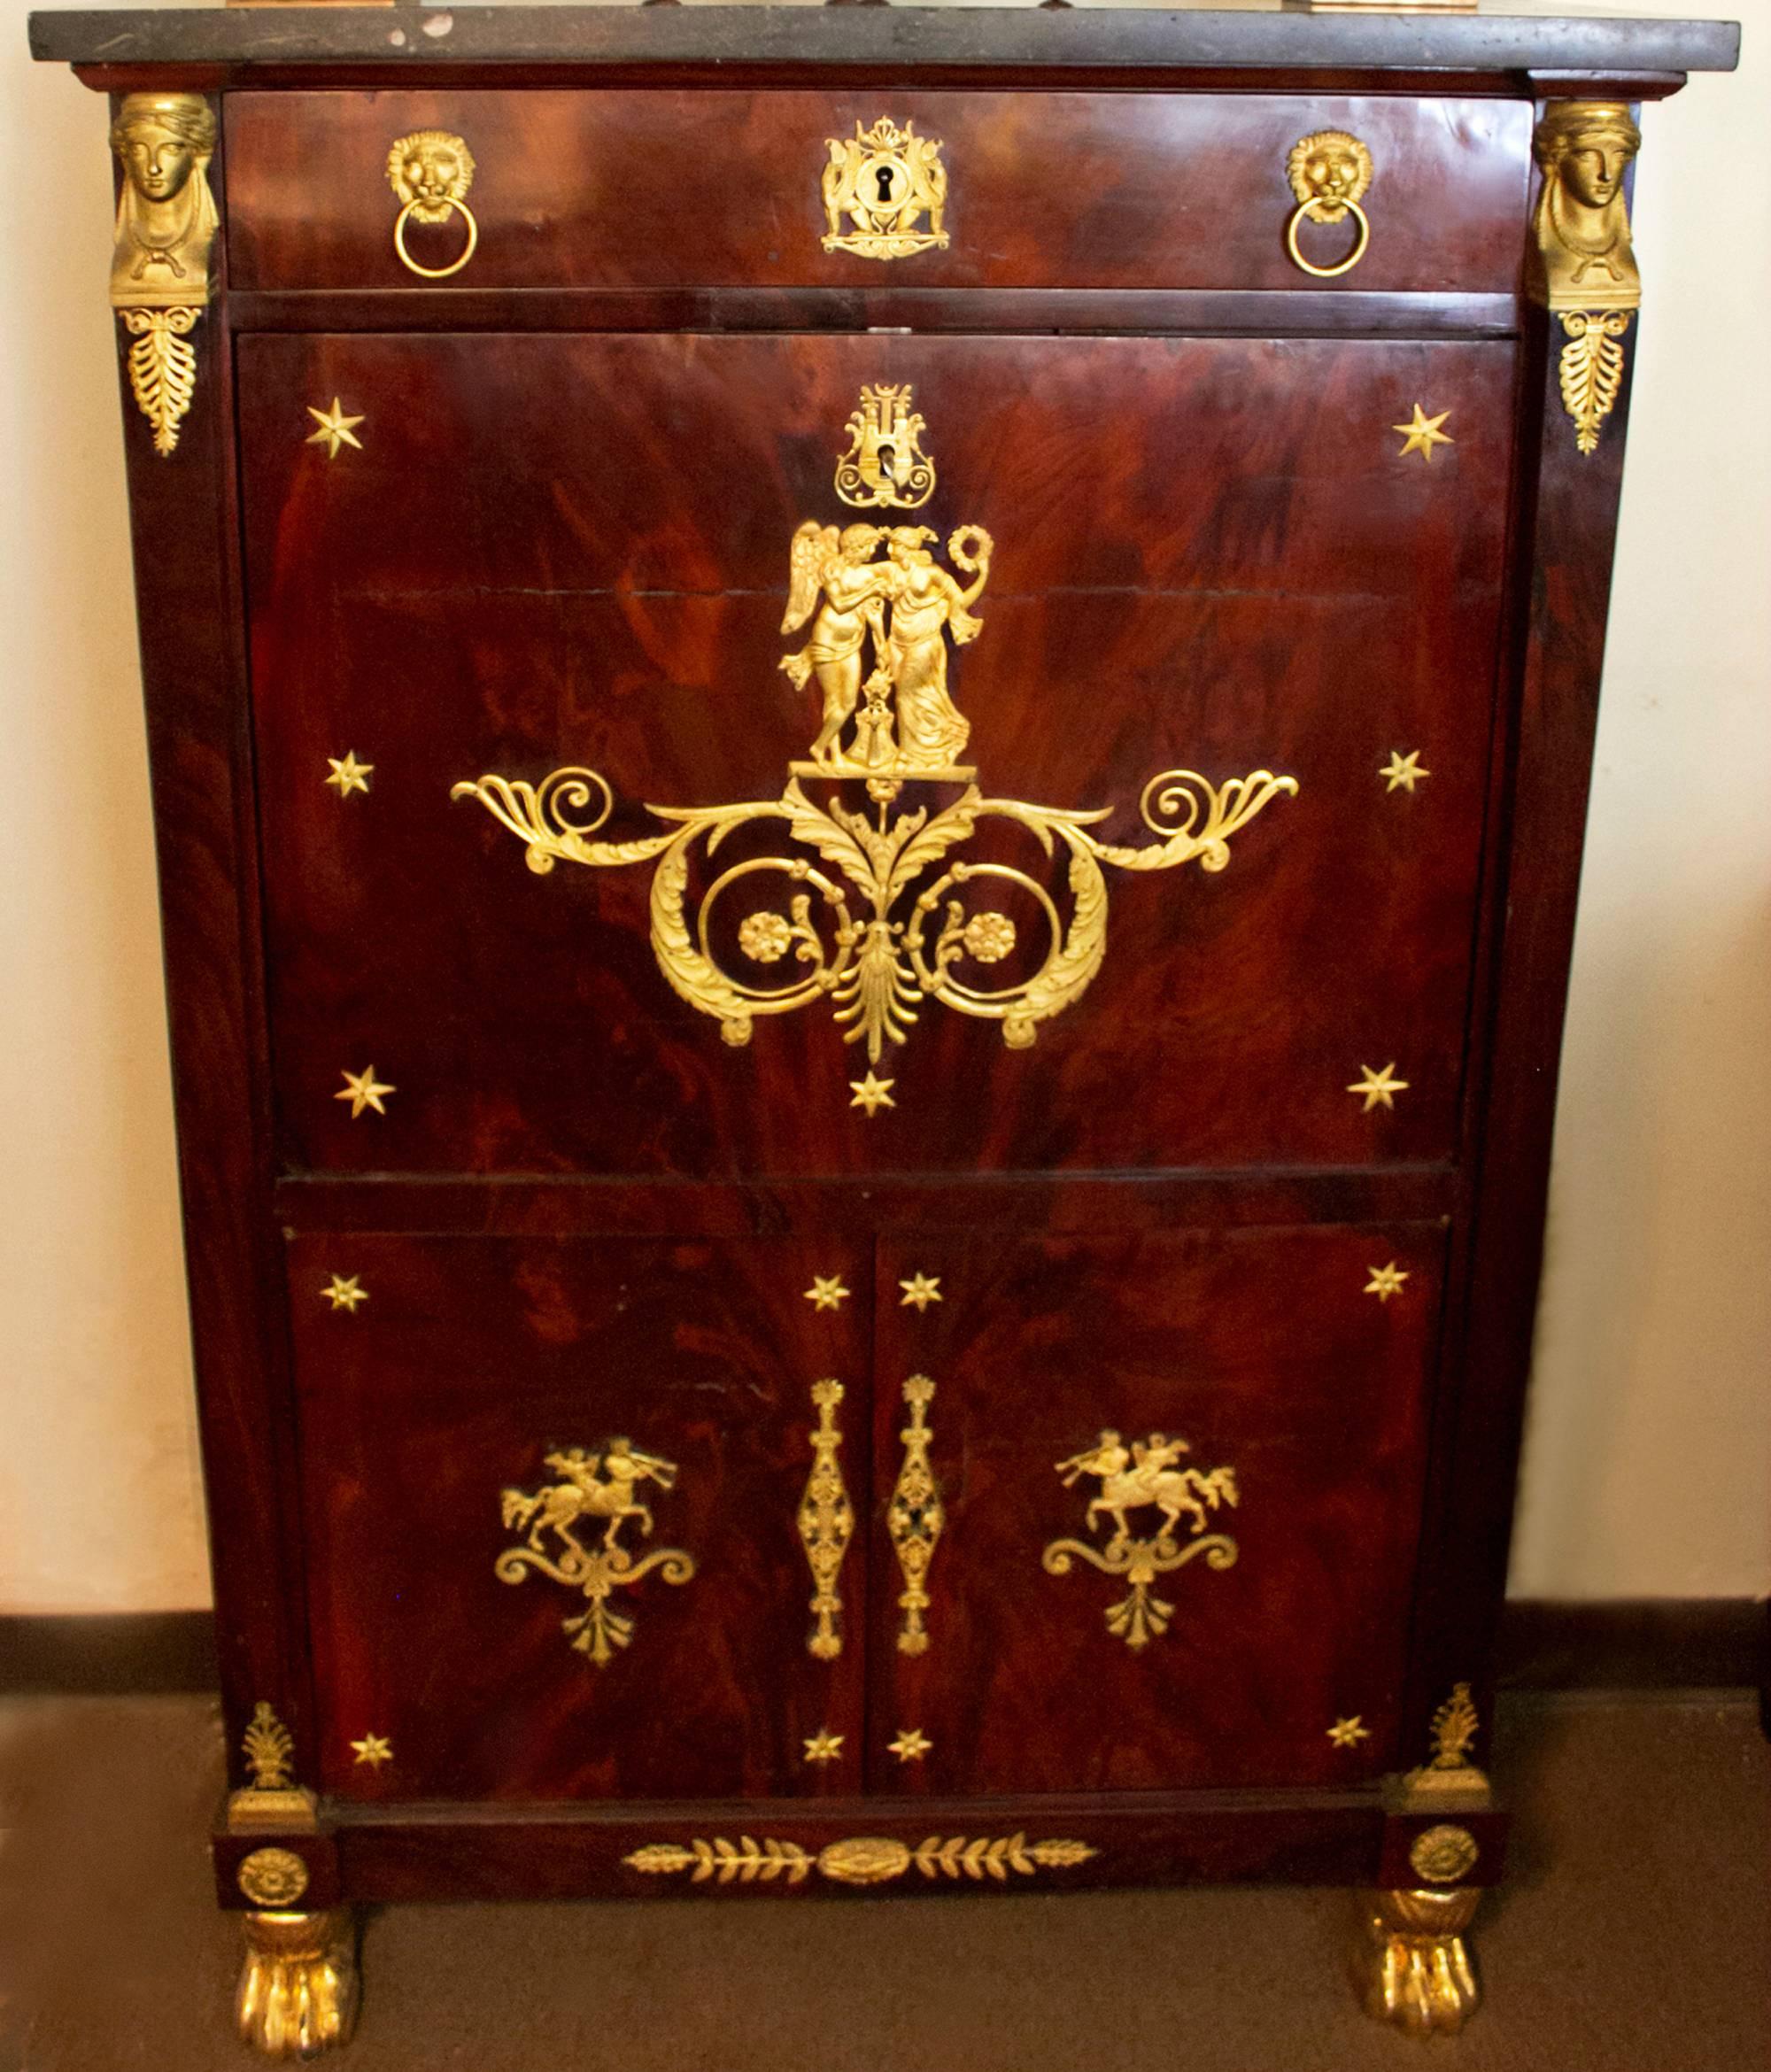  French Second Empire period flame mahogany and gilt brass-mounted secre´taire a' abattant retaining its original dark grey speckled granite top. Decorated throughout with the original ormolu neoclassical motif, the facade framed by caryatid-shaped